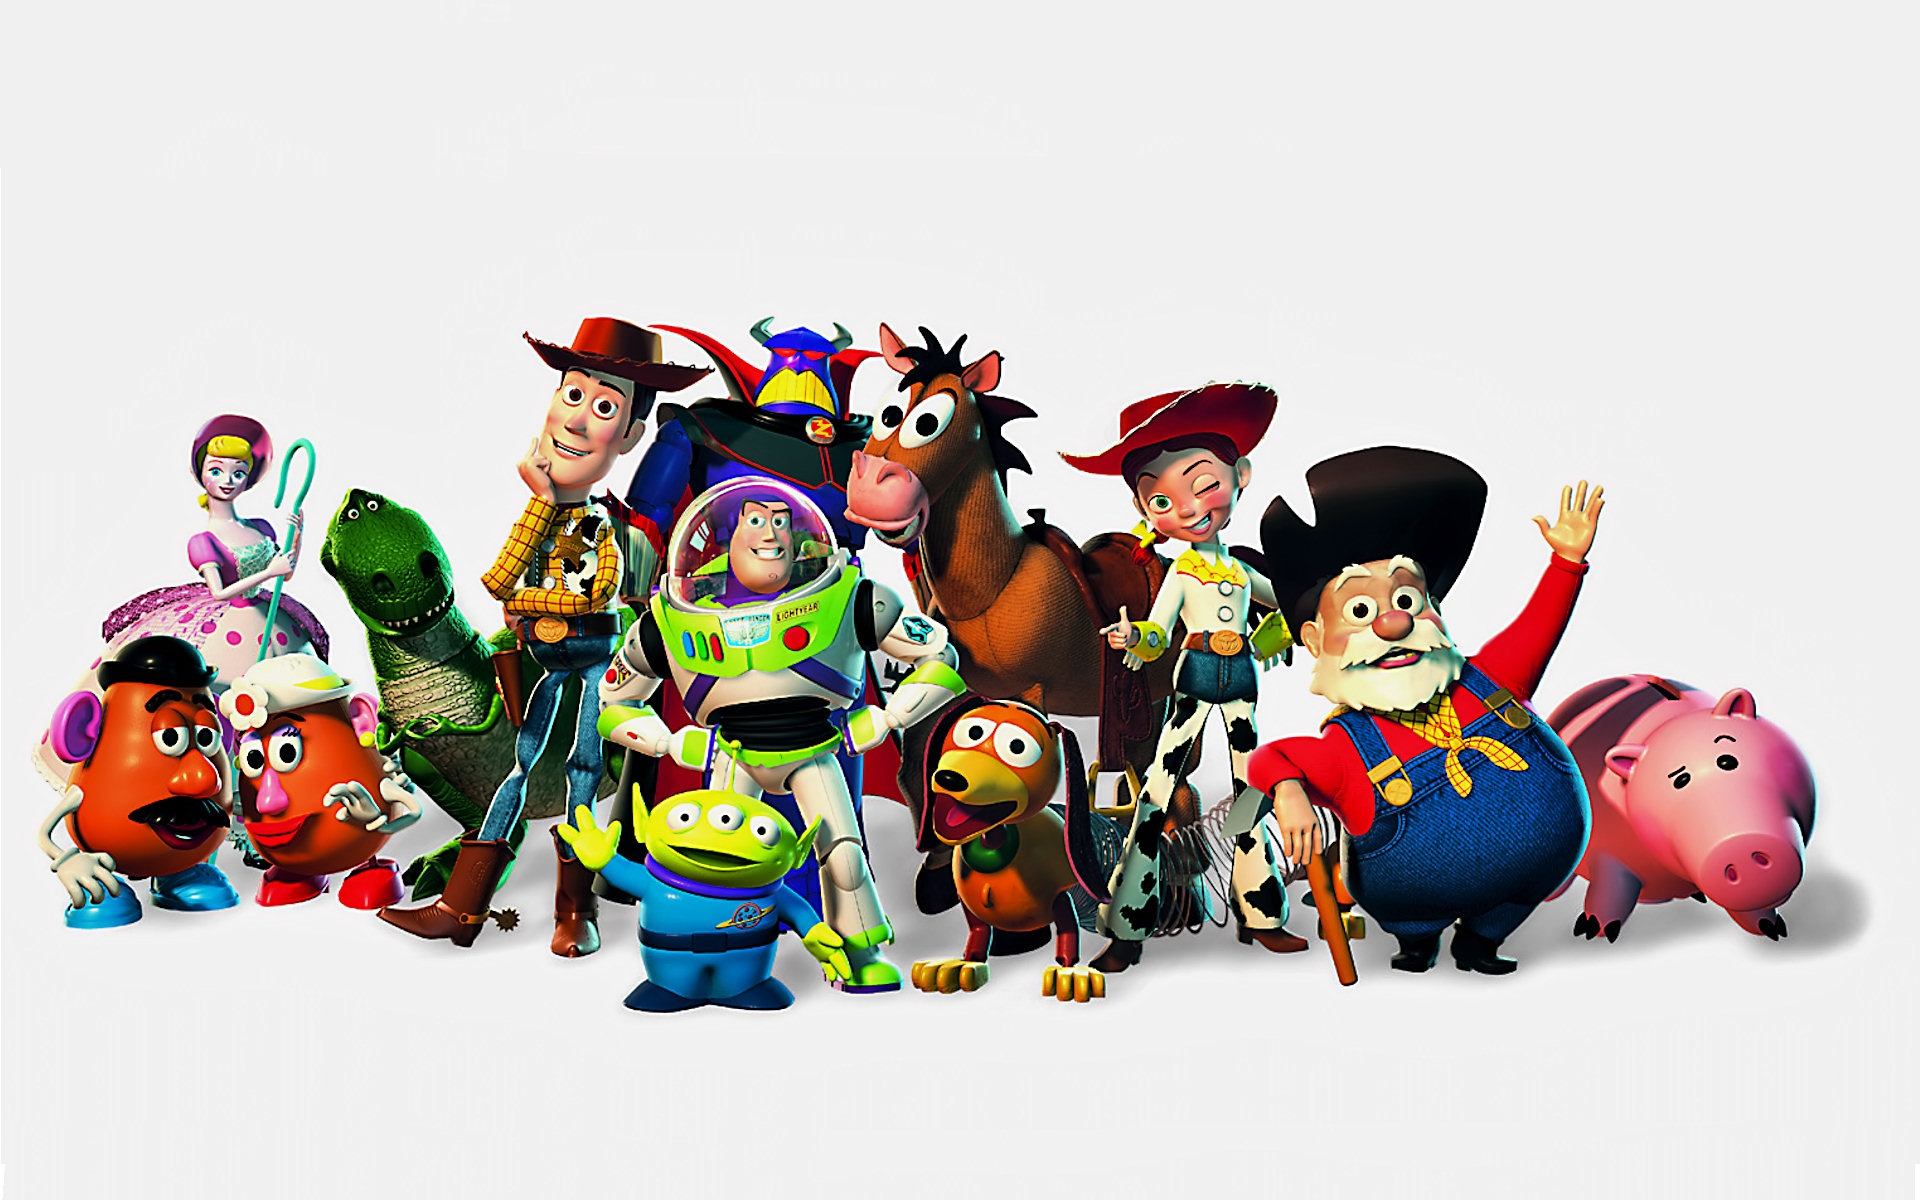 Toy Story wallpaper | 1920x1200 | #43508